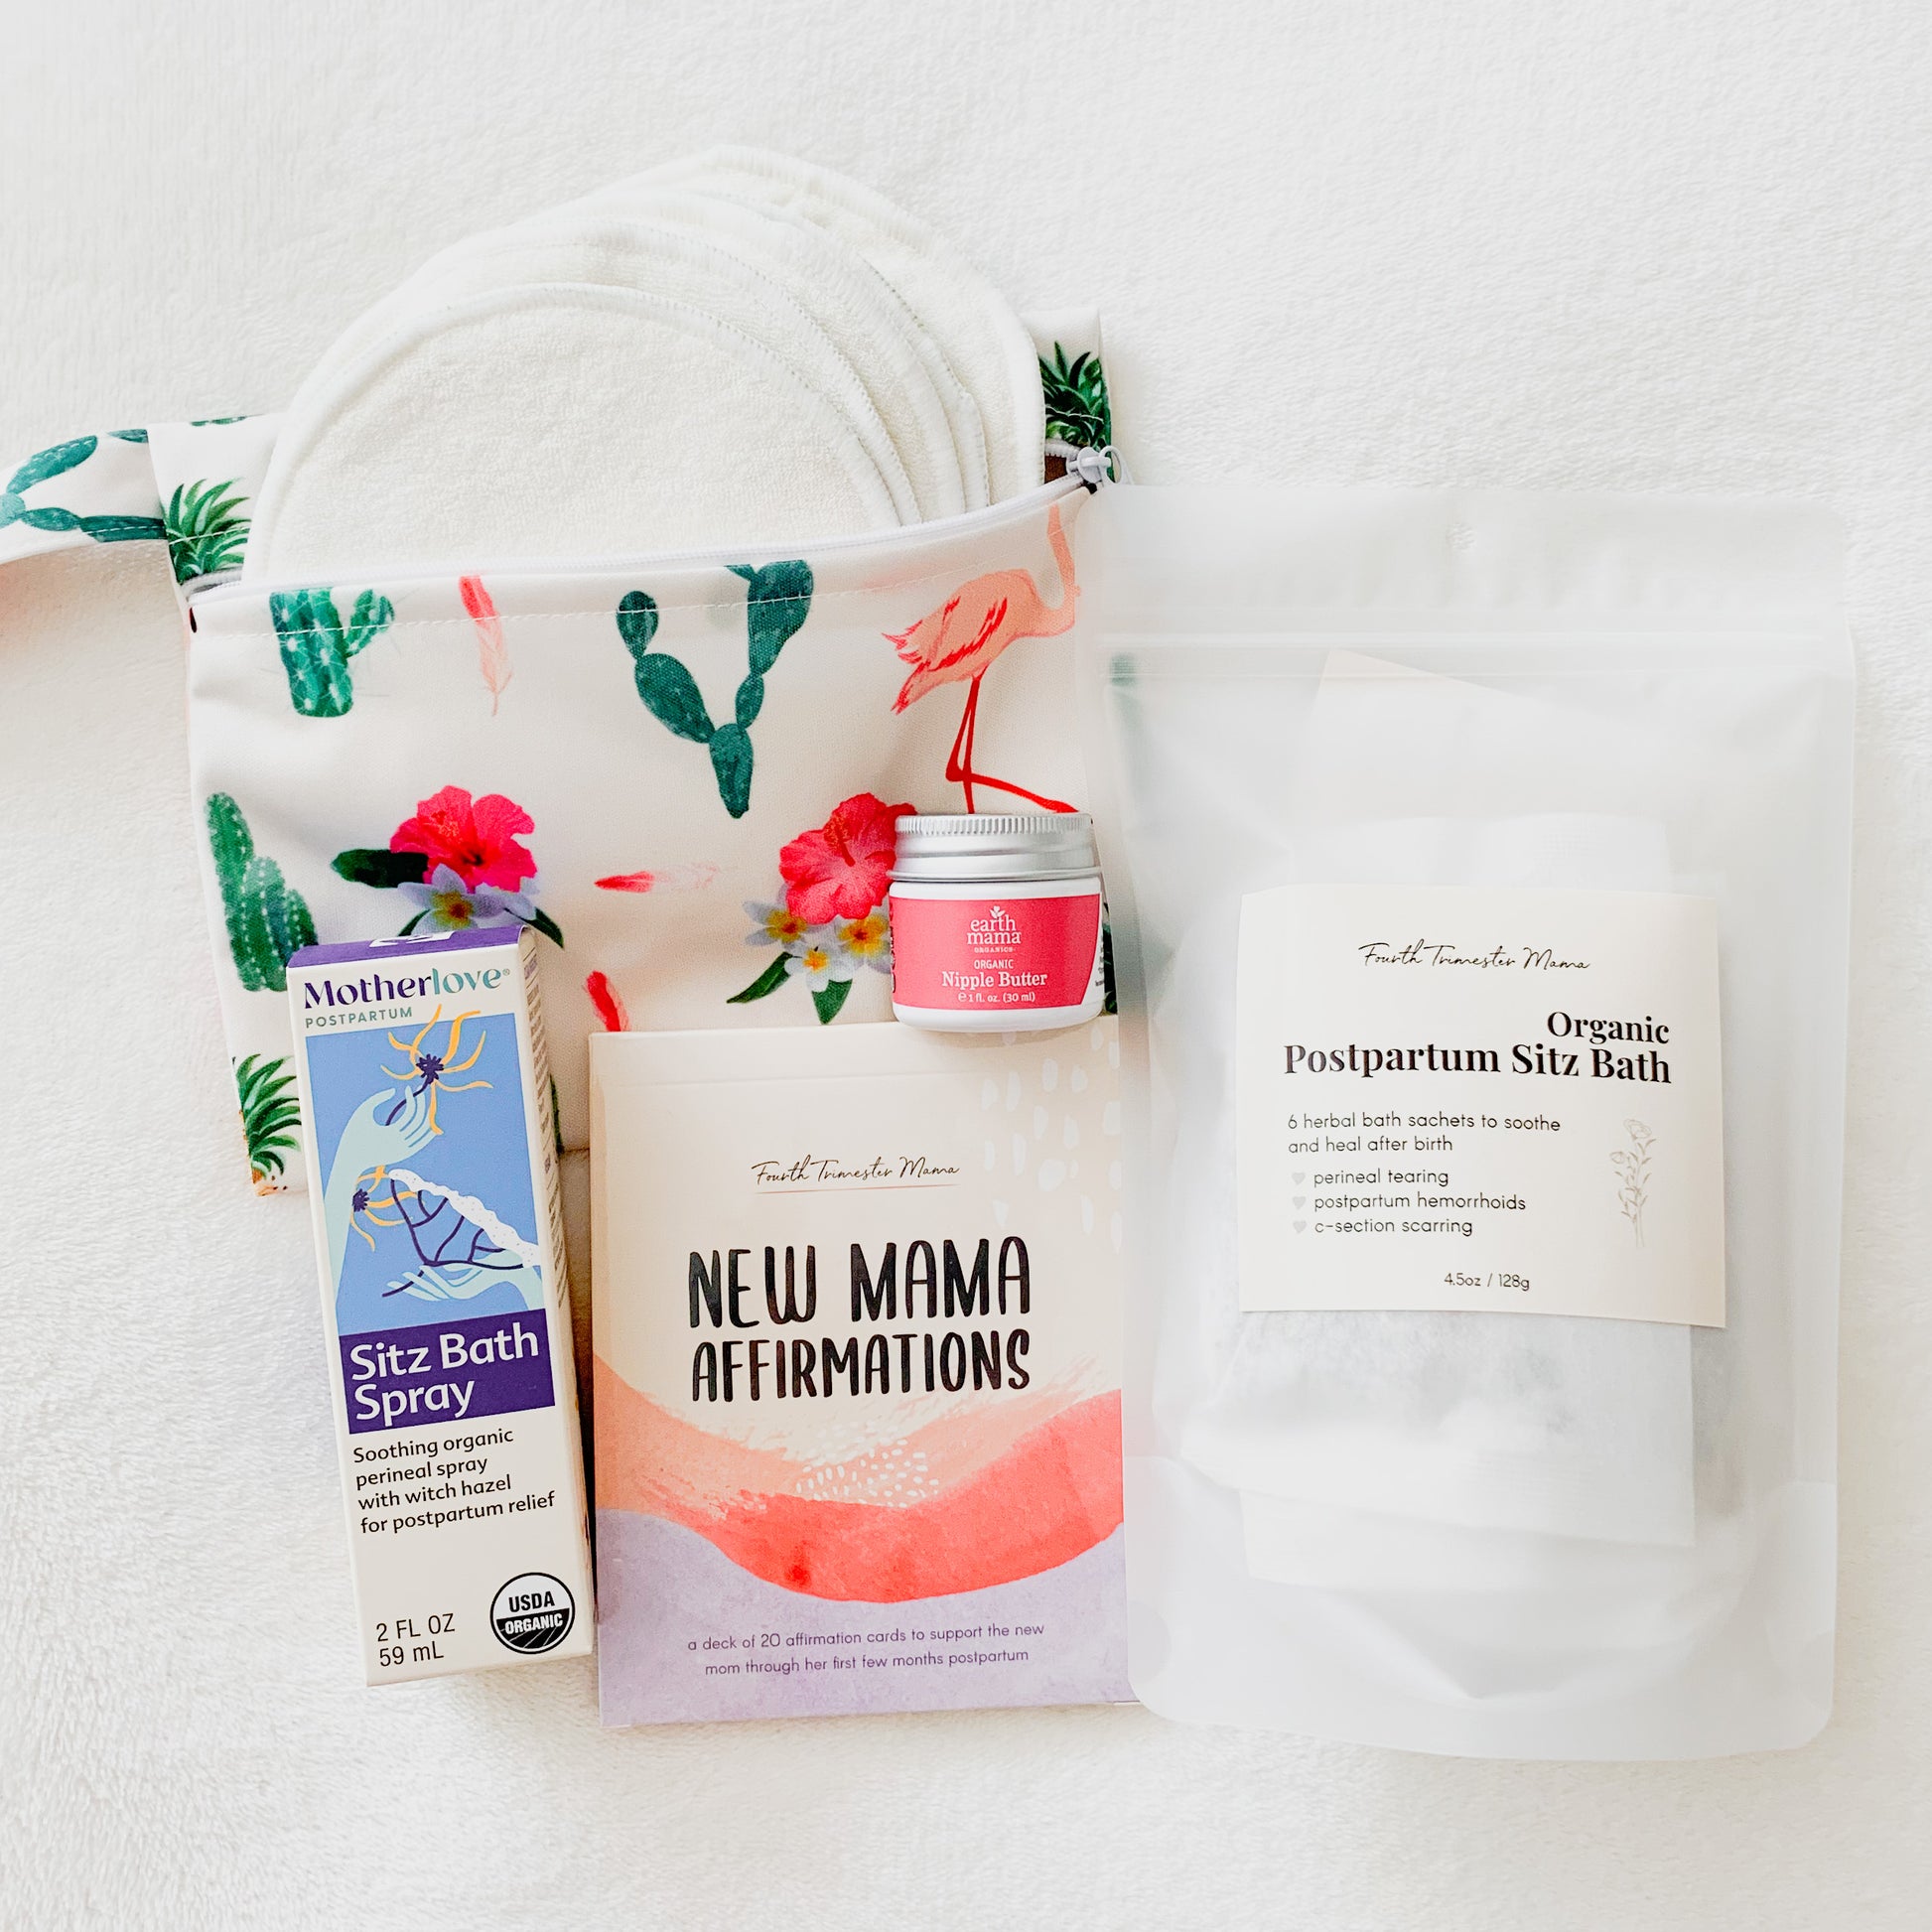 Postpartum Care Package from Fourth Trimester Mama featuring postpartum essentials including nursing pads, sitz bath, affirmation cards, nipple butter, and perineal spray